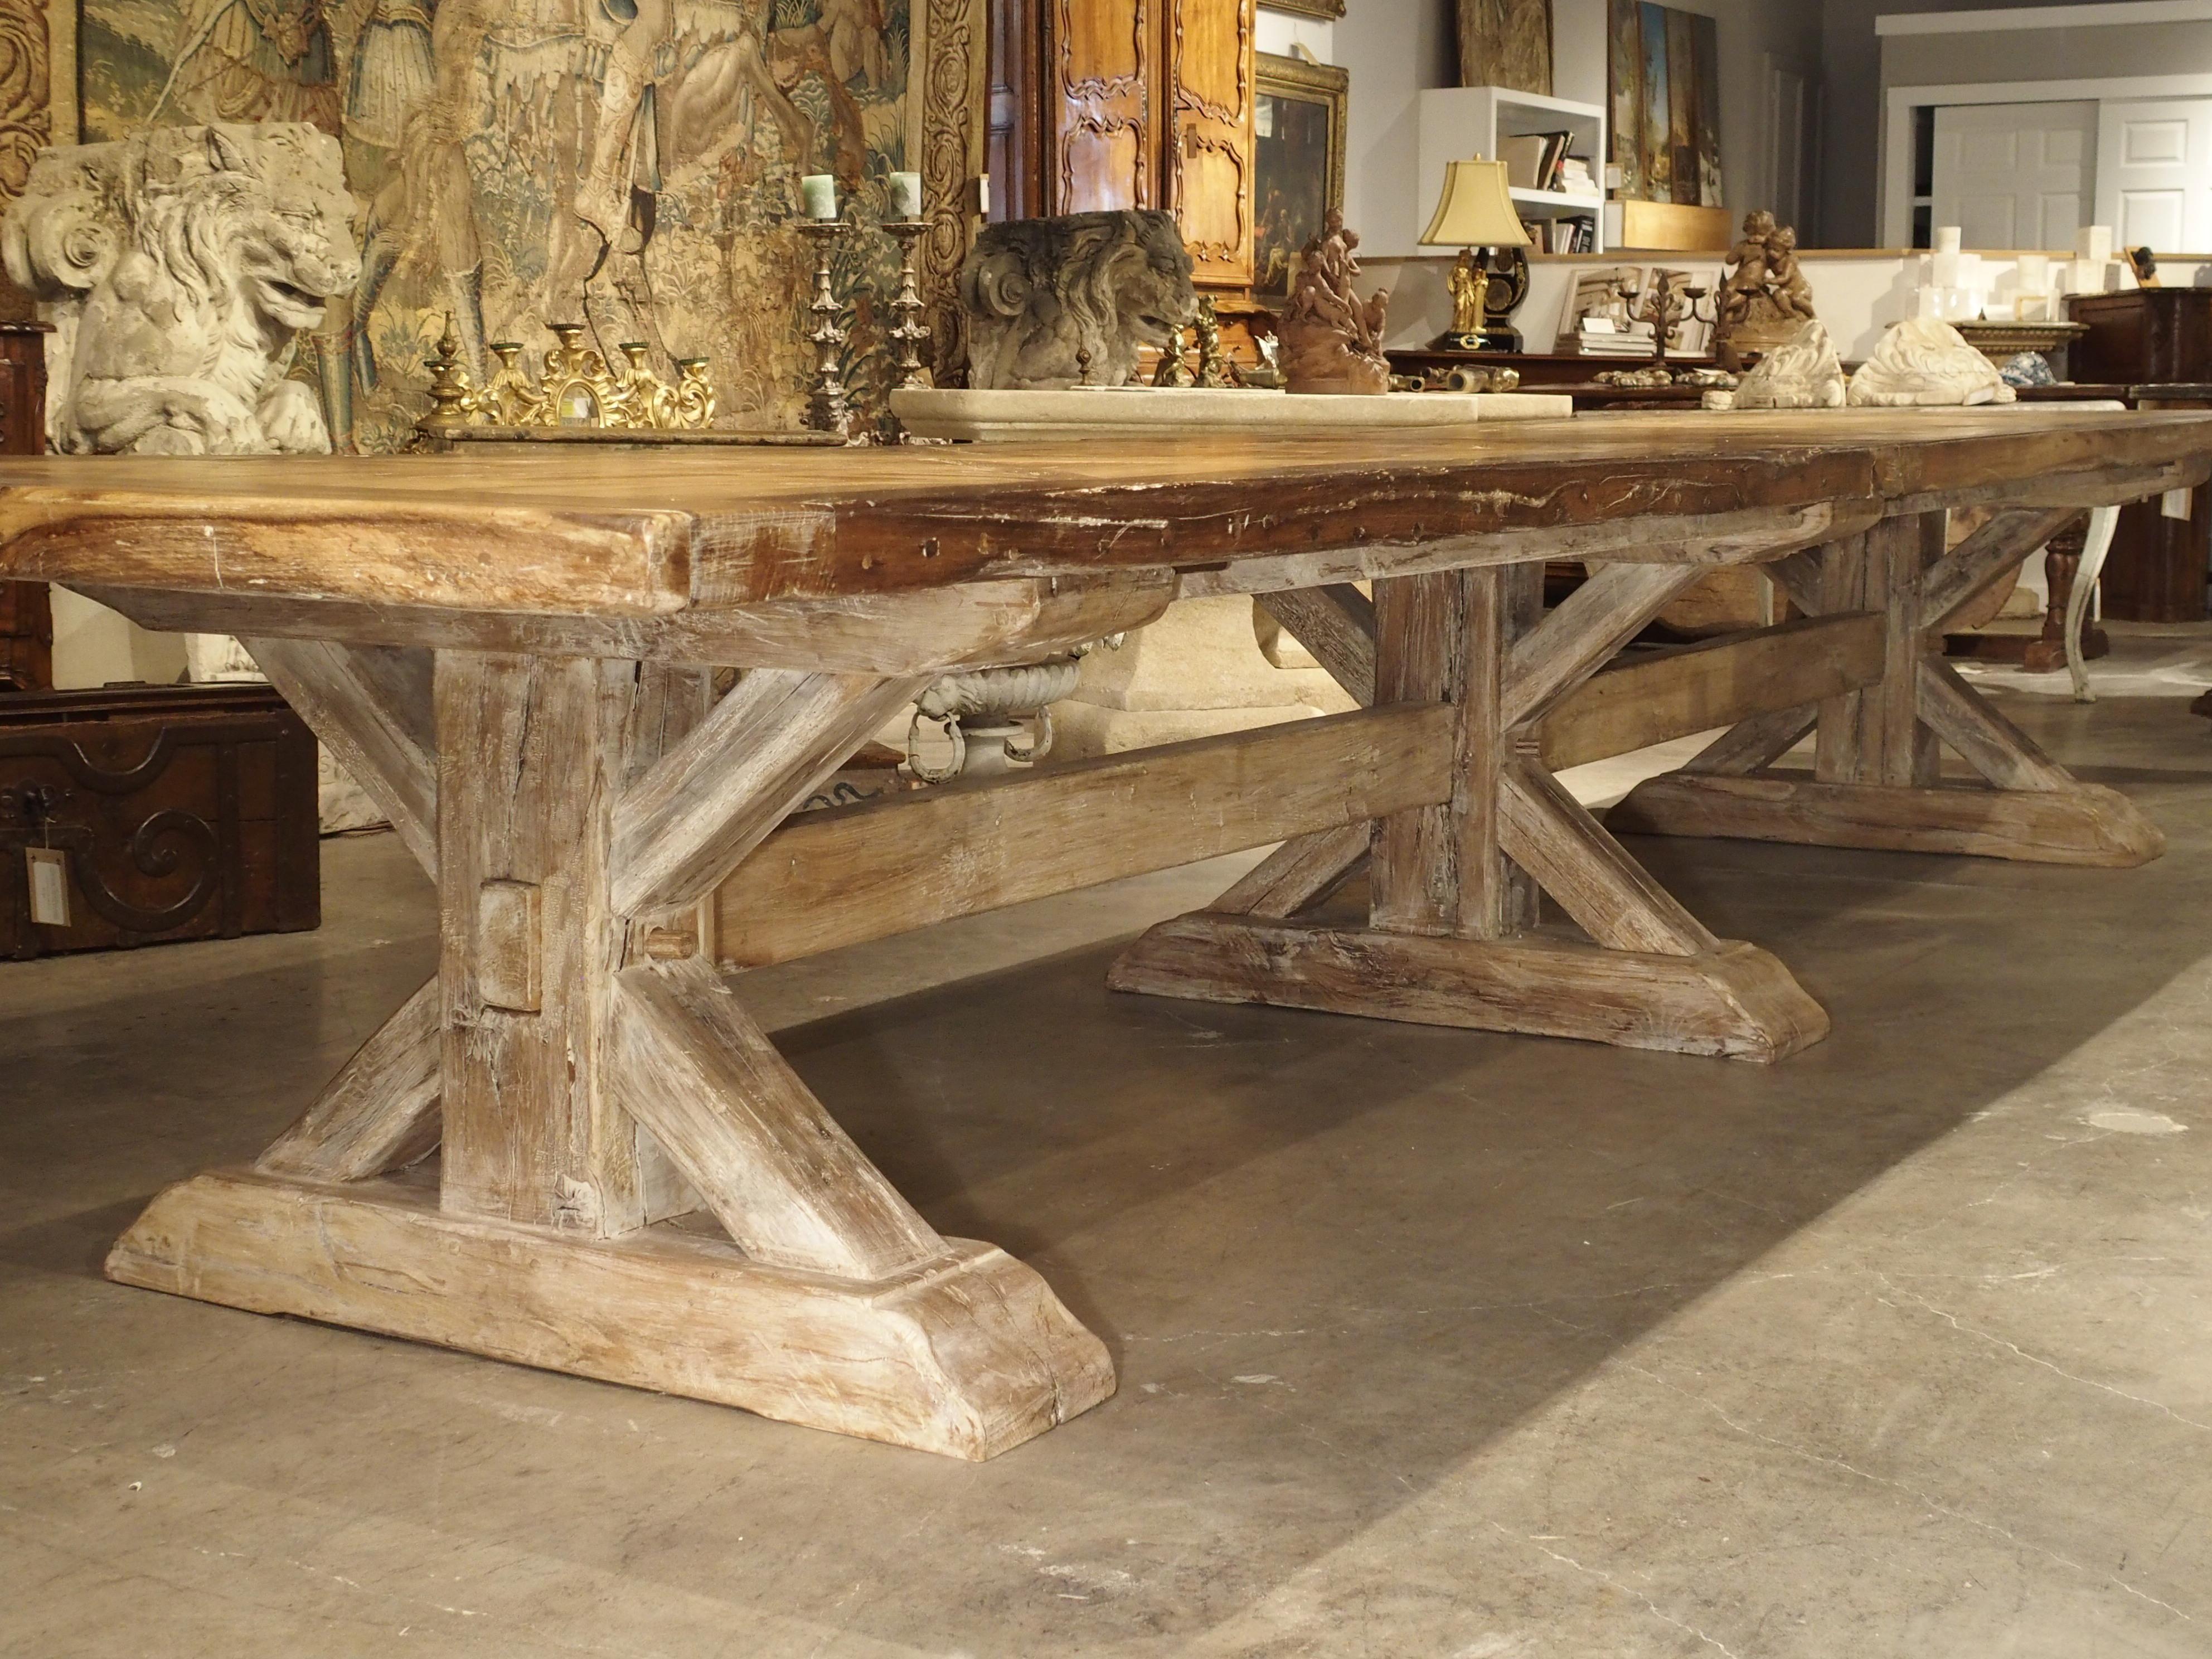 This impressive French dining table is made of thick oak boards and has a parquet inset top. The top has been made with planks that vary in coloration and grain, while the thicker frame around the parquet is in a slightly darker stain. The base of